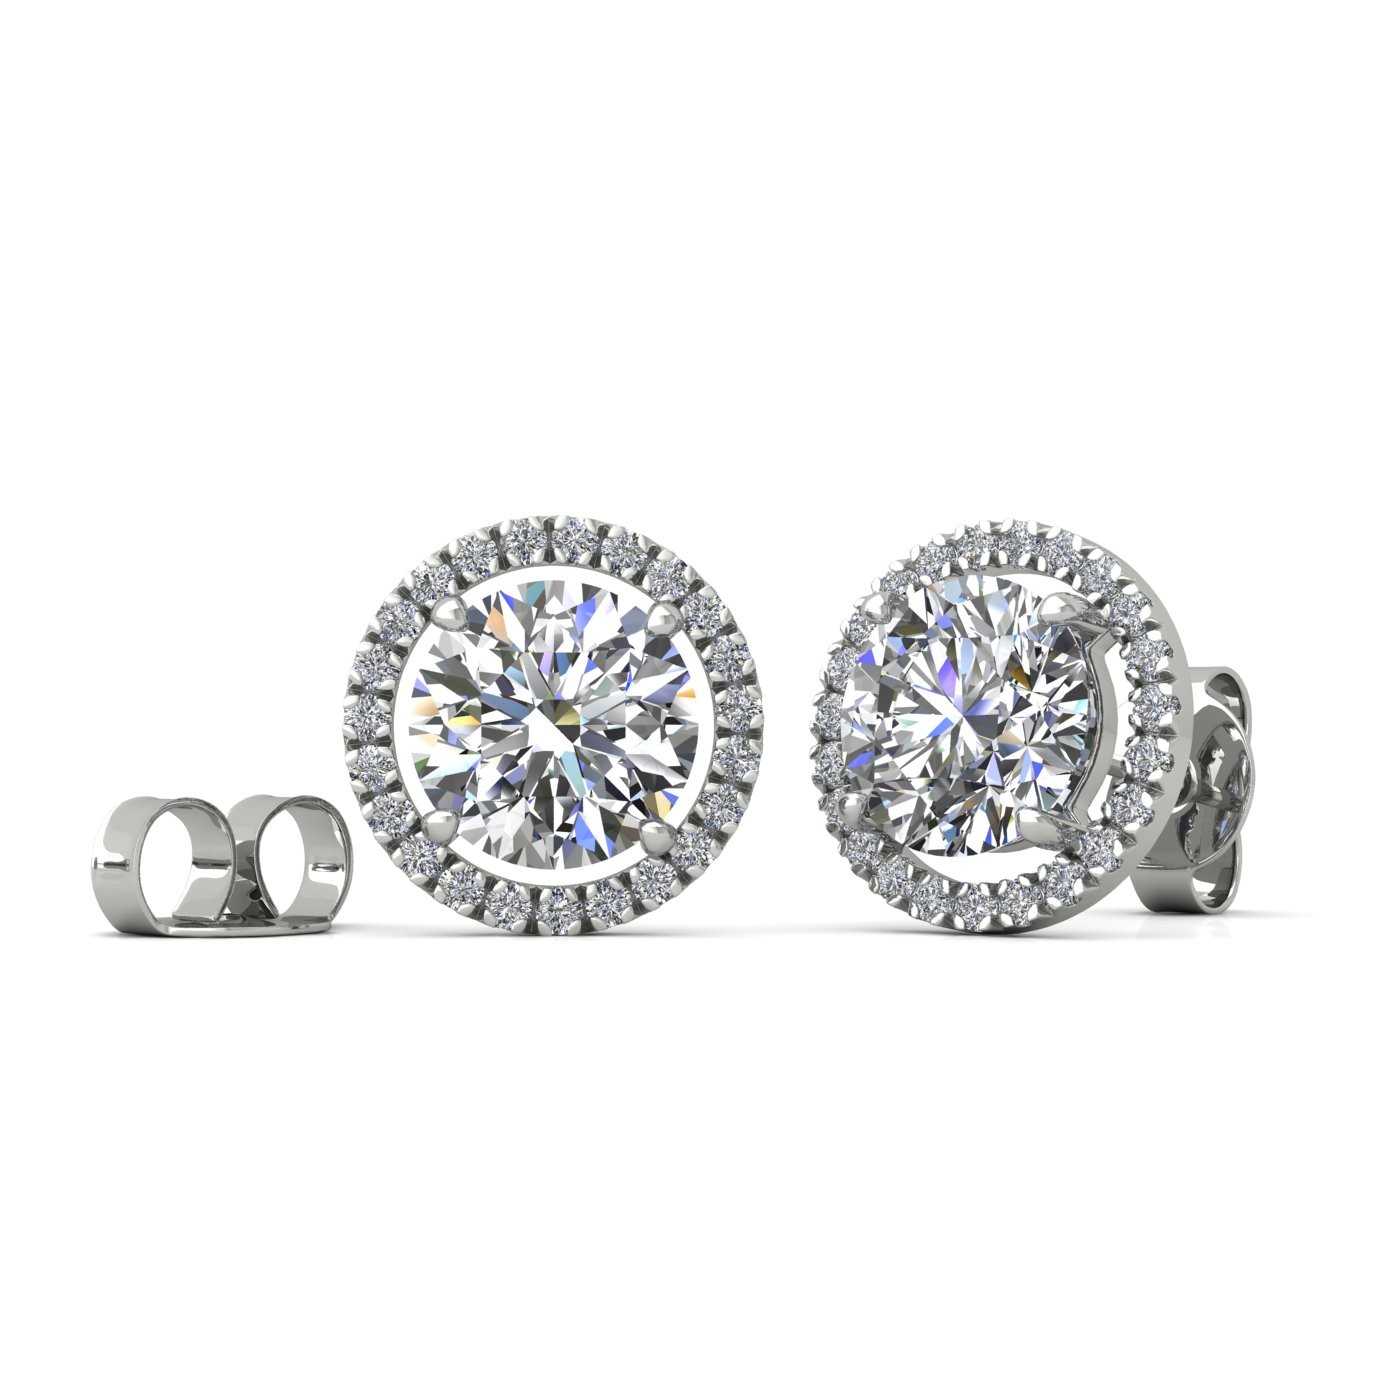 18k white gold  1,2 ct each (2,4 tcw) 4 prongs round brilliant cut halo diamond earring studs Photos & images